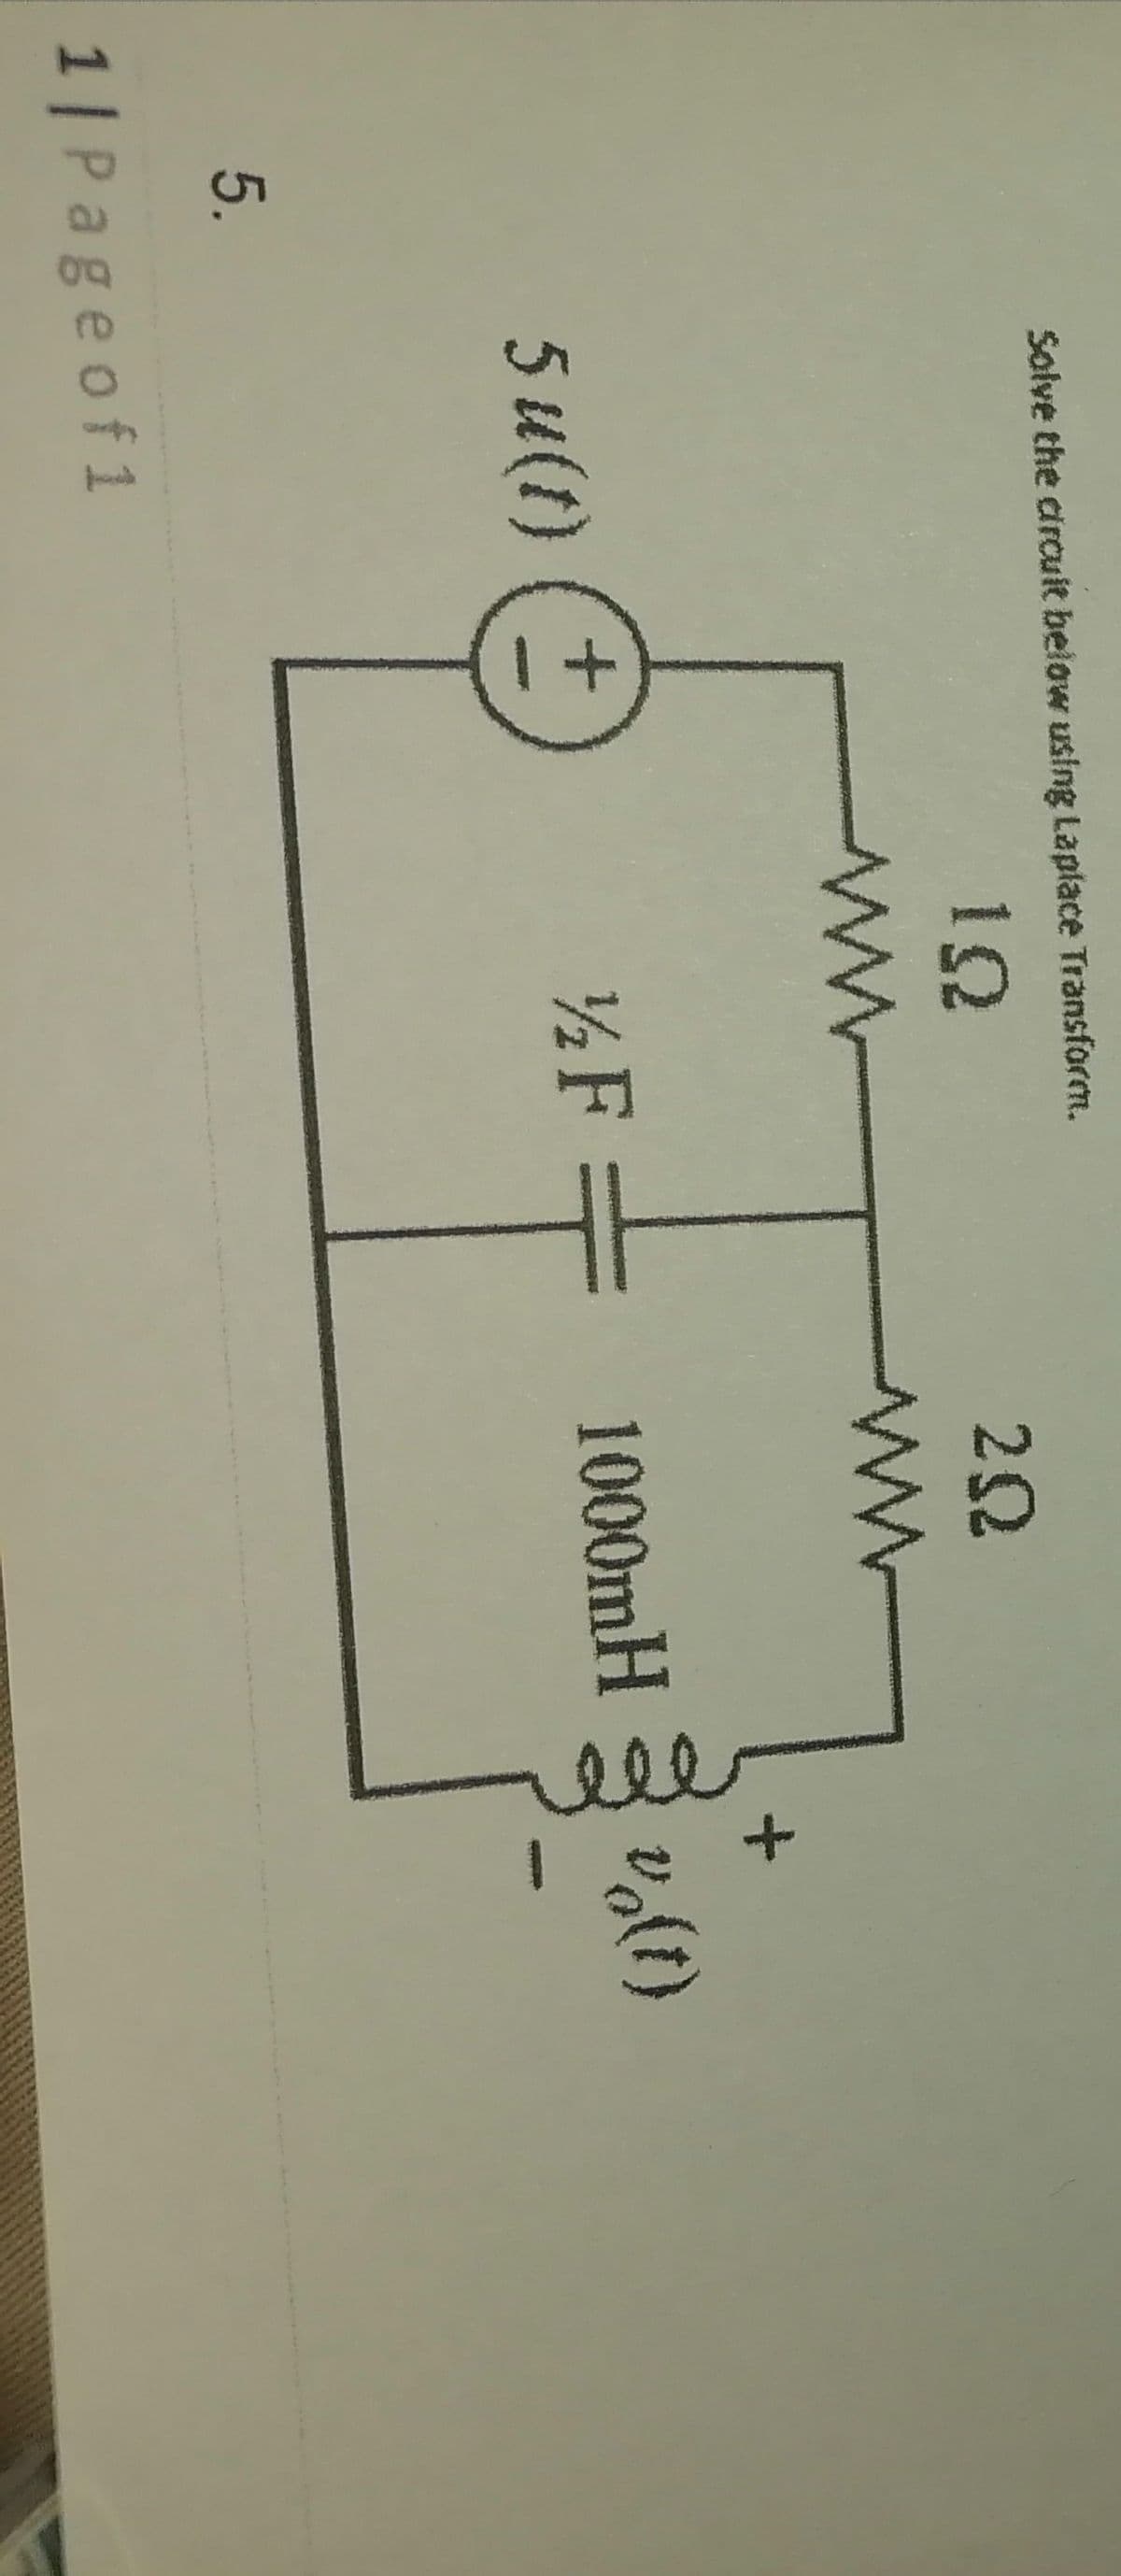 Solve the circuit below using Laplace Transform.
19
ww
+
5 u(t)
5.
1| Page of 1
½2F =
202
www
1000mH
+
v(t)